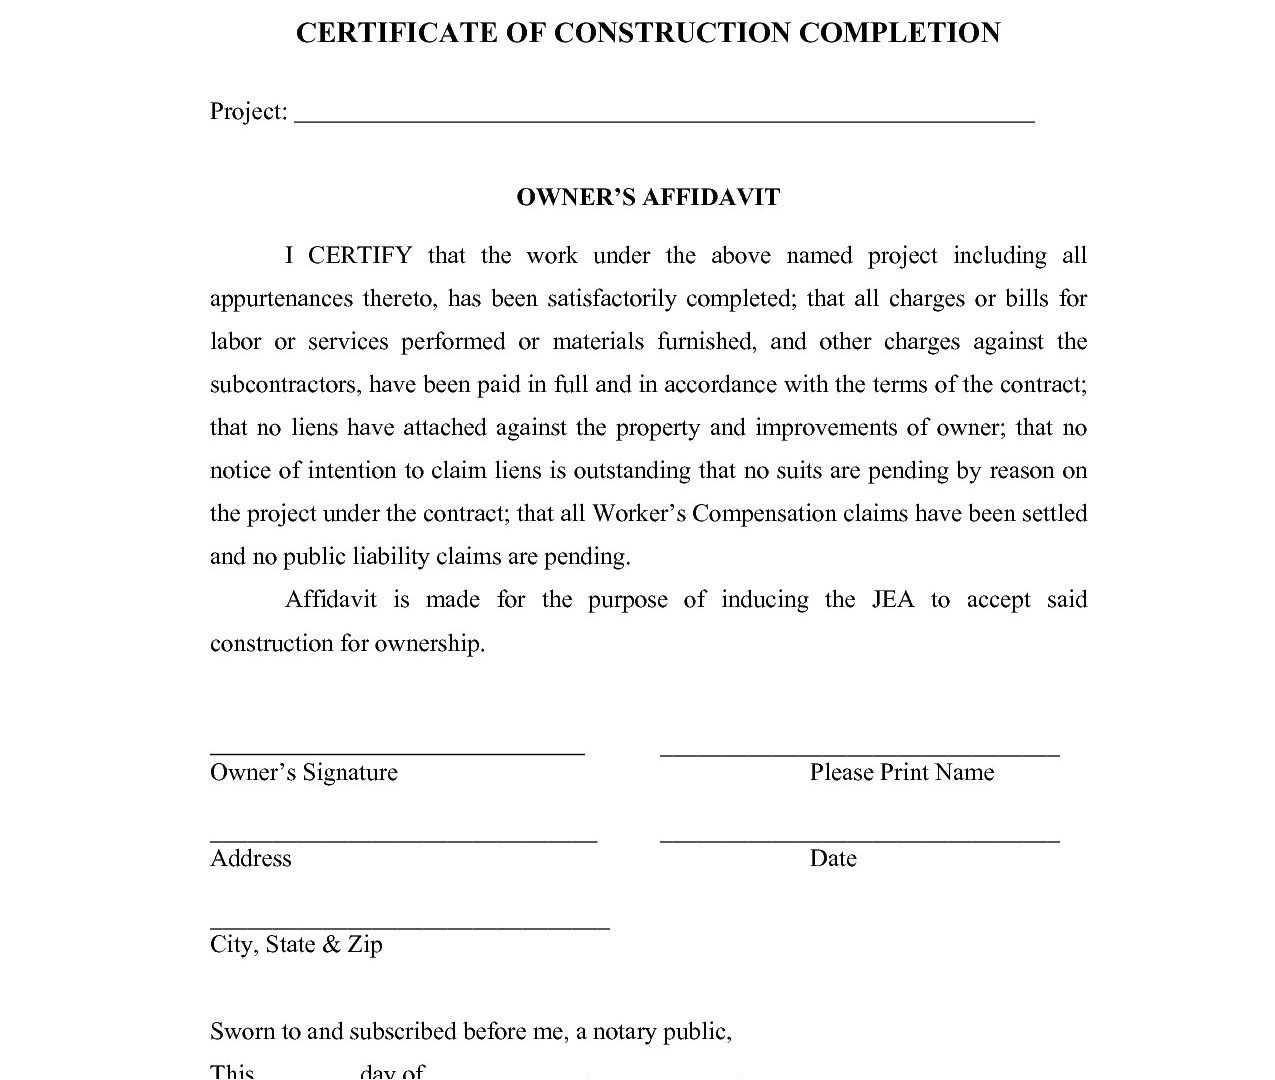 Work Completion Certificate Template – Falep.midnightpig.co With Construction Certificate Of Completion Template